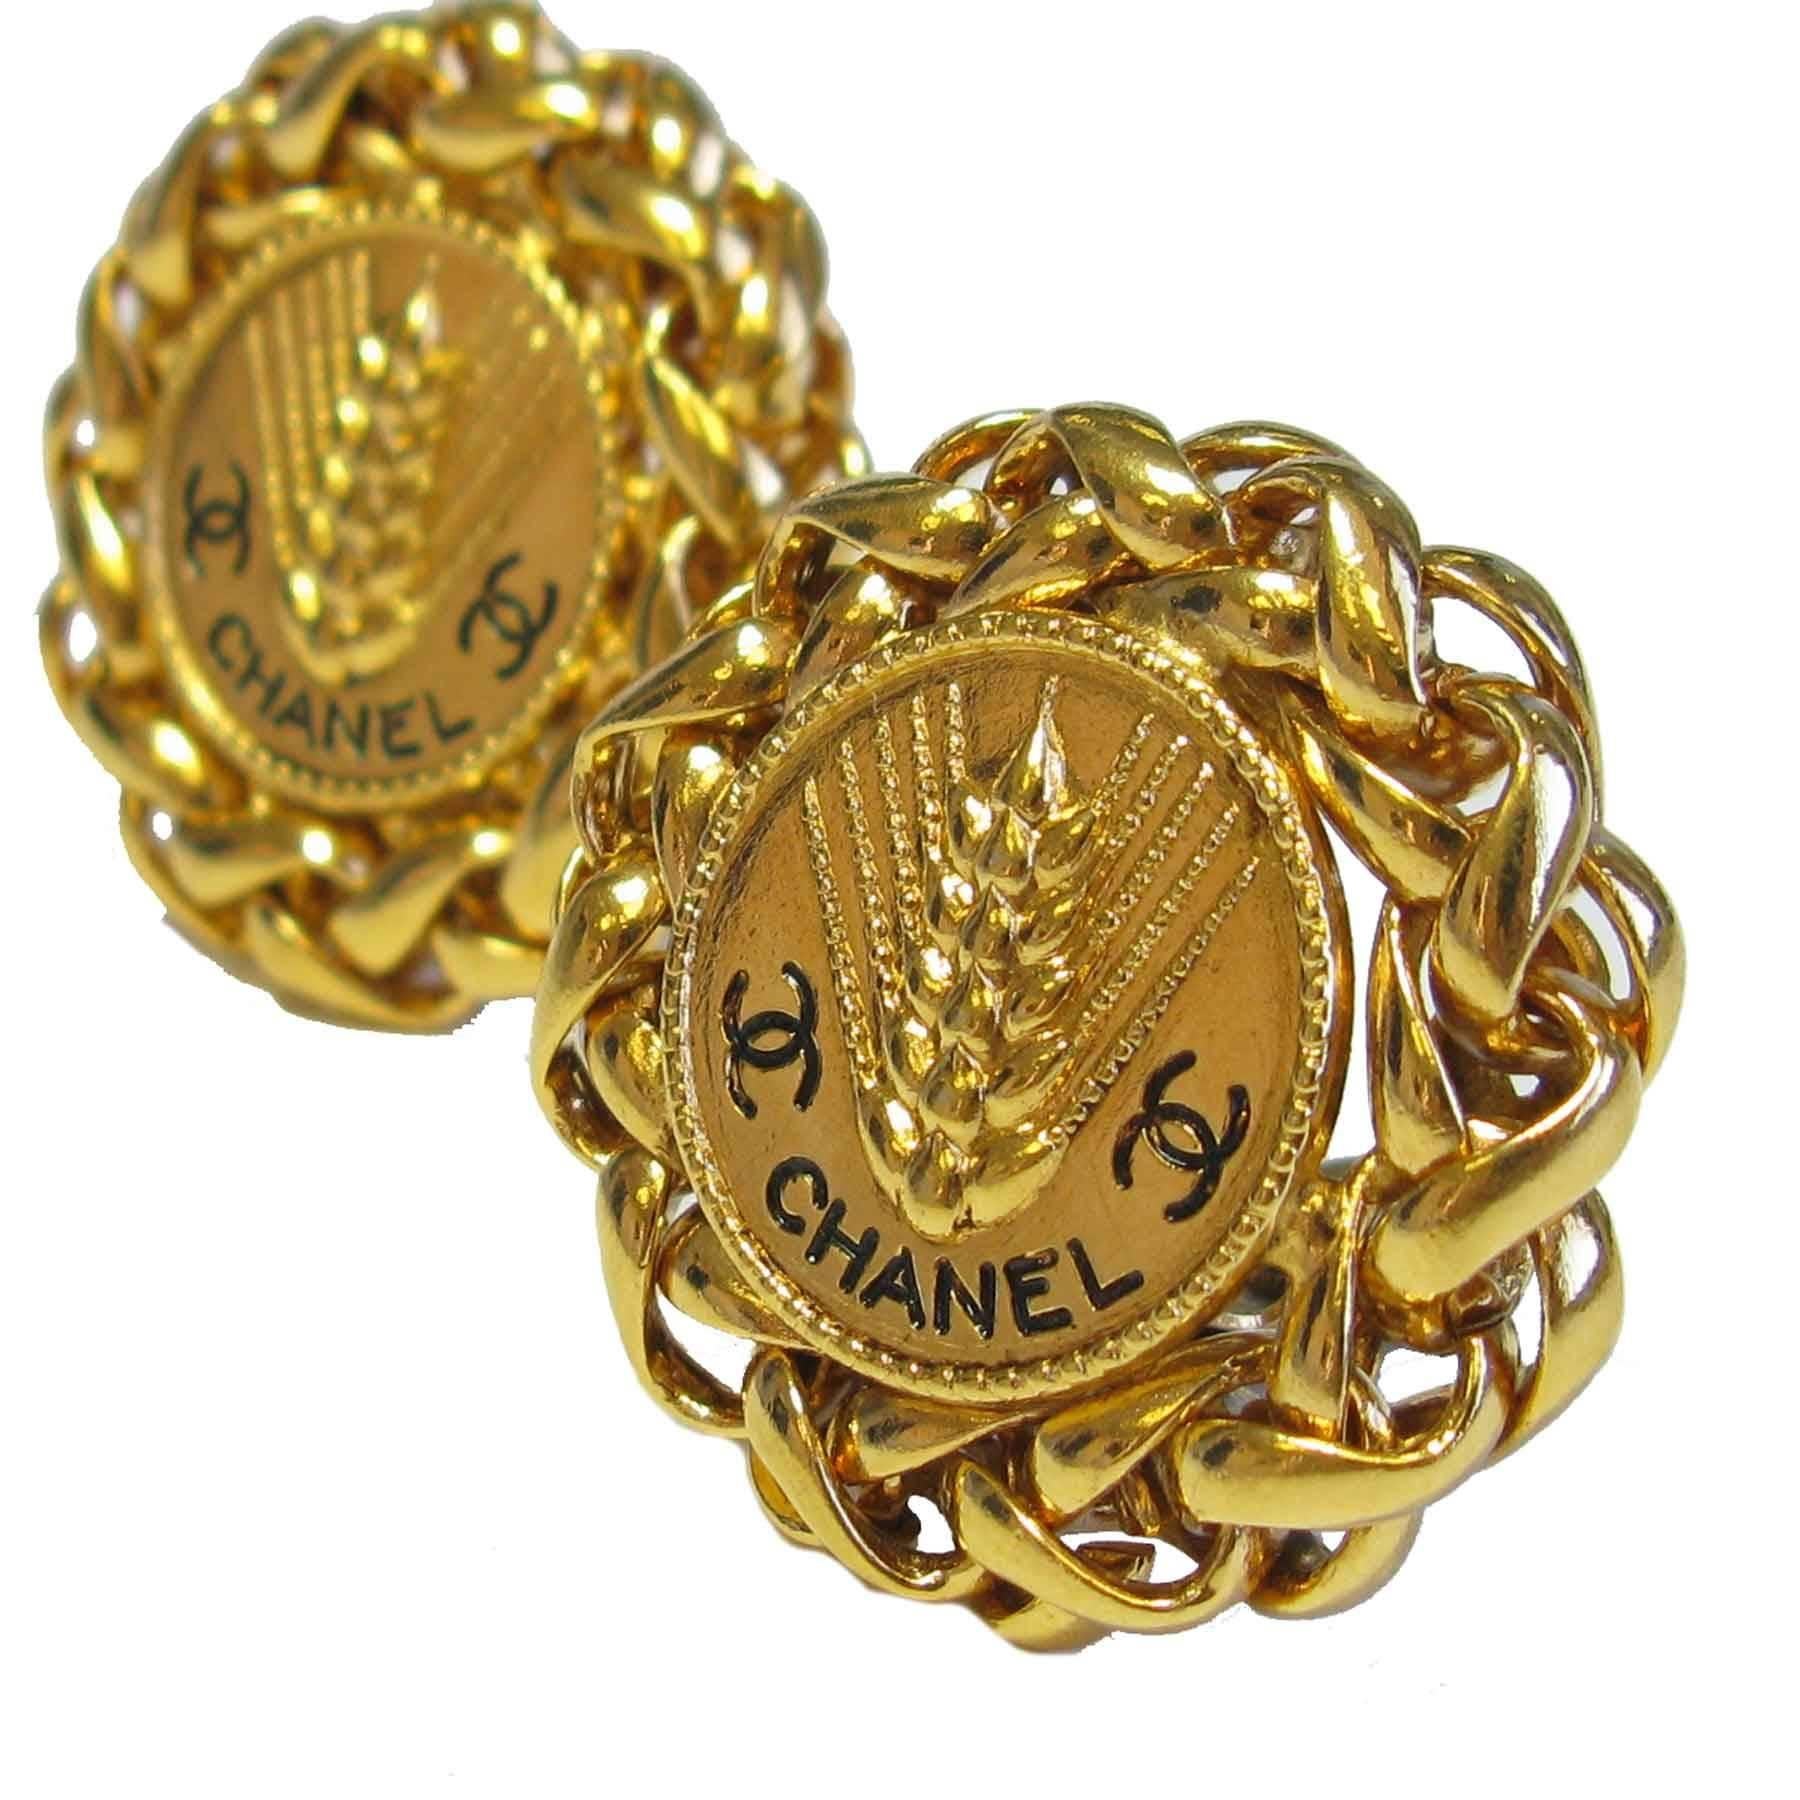 Vintage Chanel clip-on earrings in gold plated metal. The distinctive signs of the mark are found on these earrings: ear of wheat, CC, Chanel, circled by the famous chain.

The signature 'Chanel' is on each clip. 

Delivered in a Valois Vintage